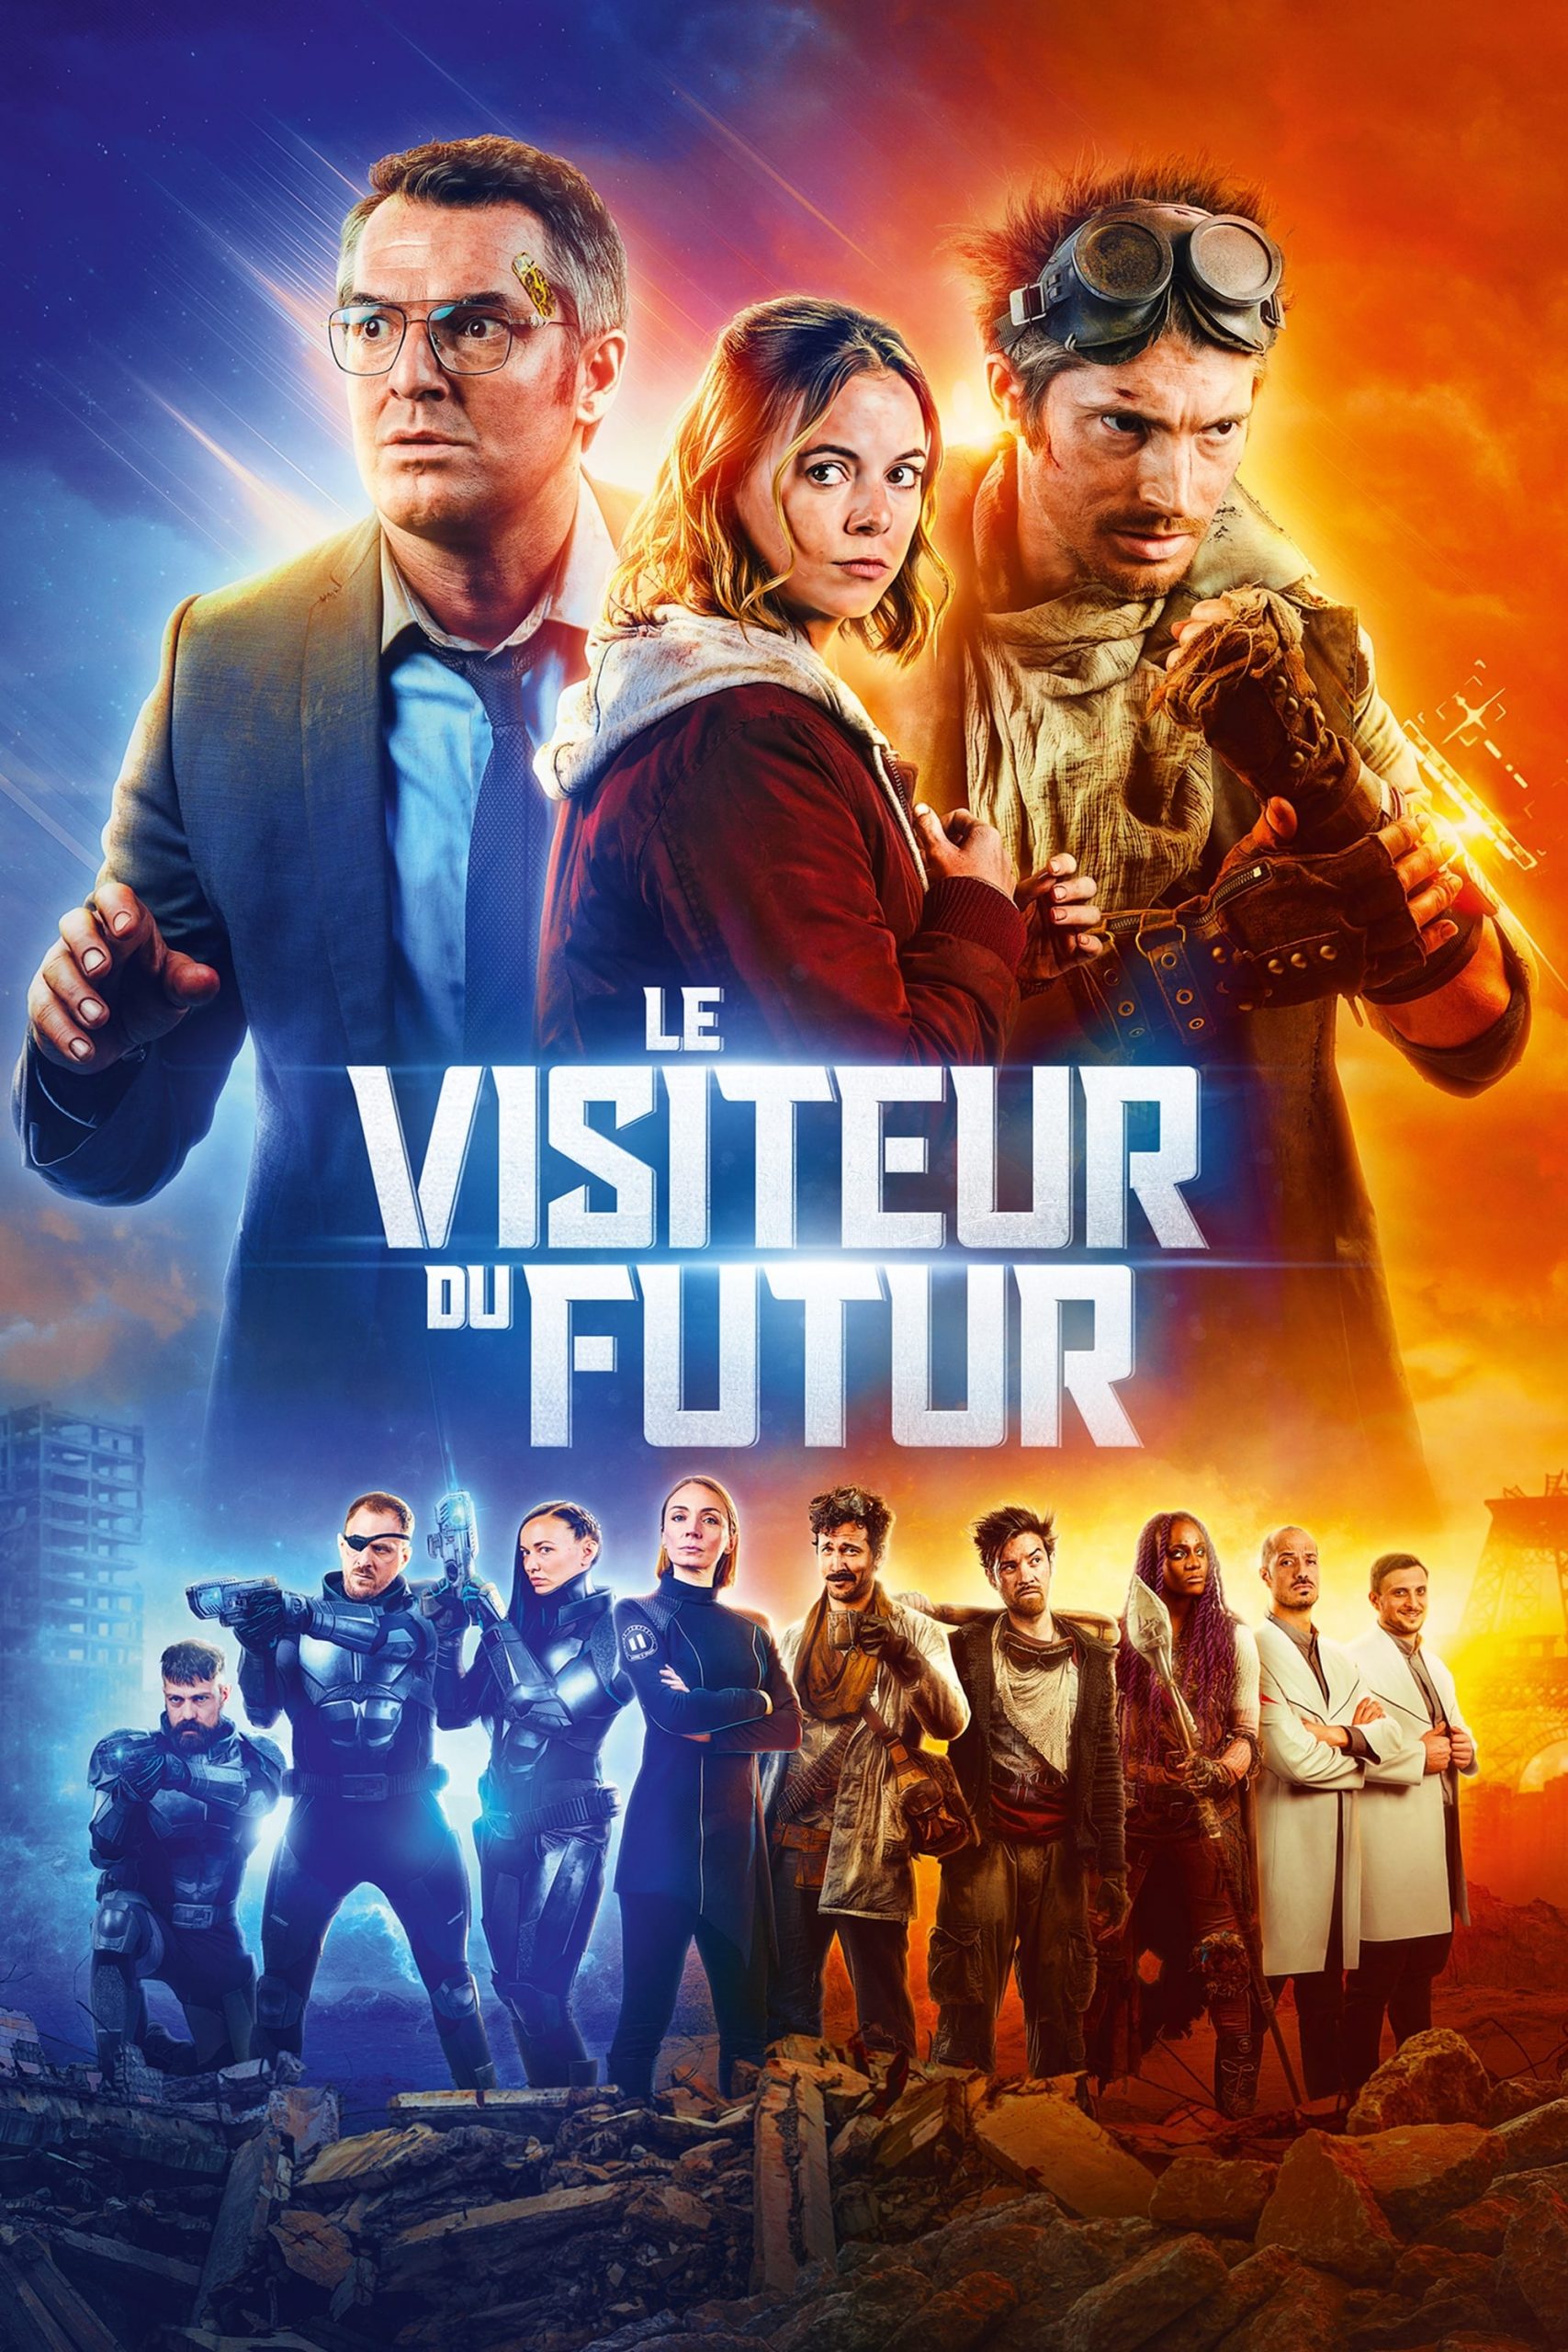 The Visitor from the Future (Le visiteur du futur) (2022)